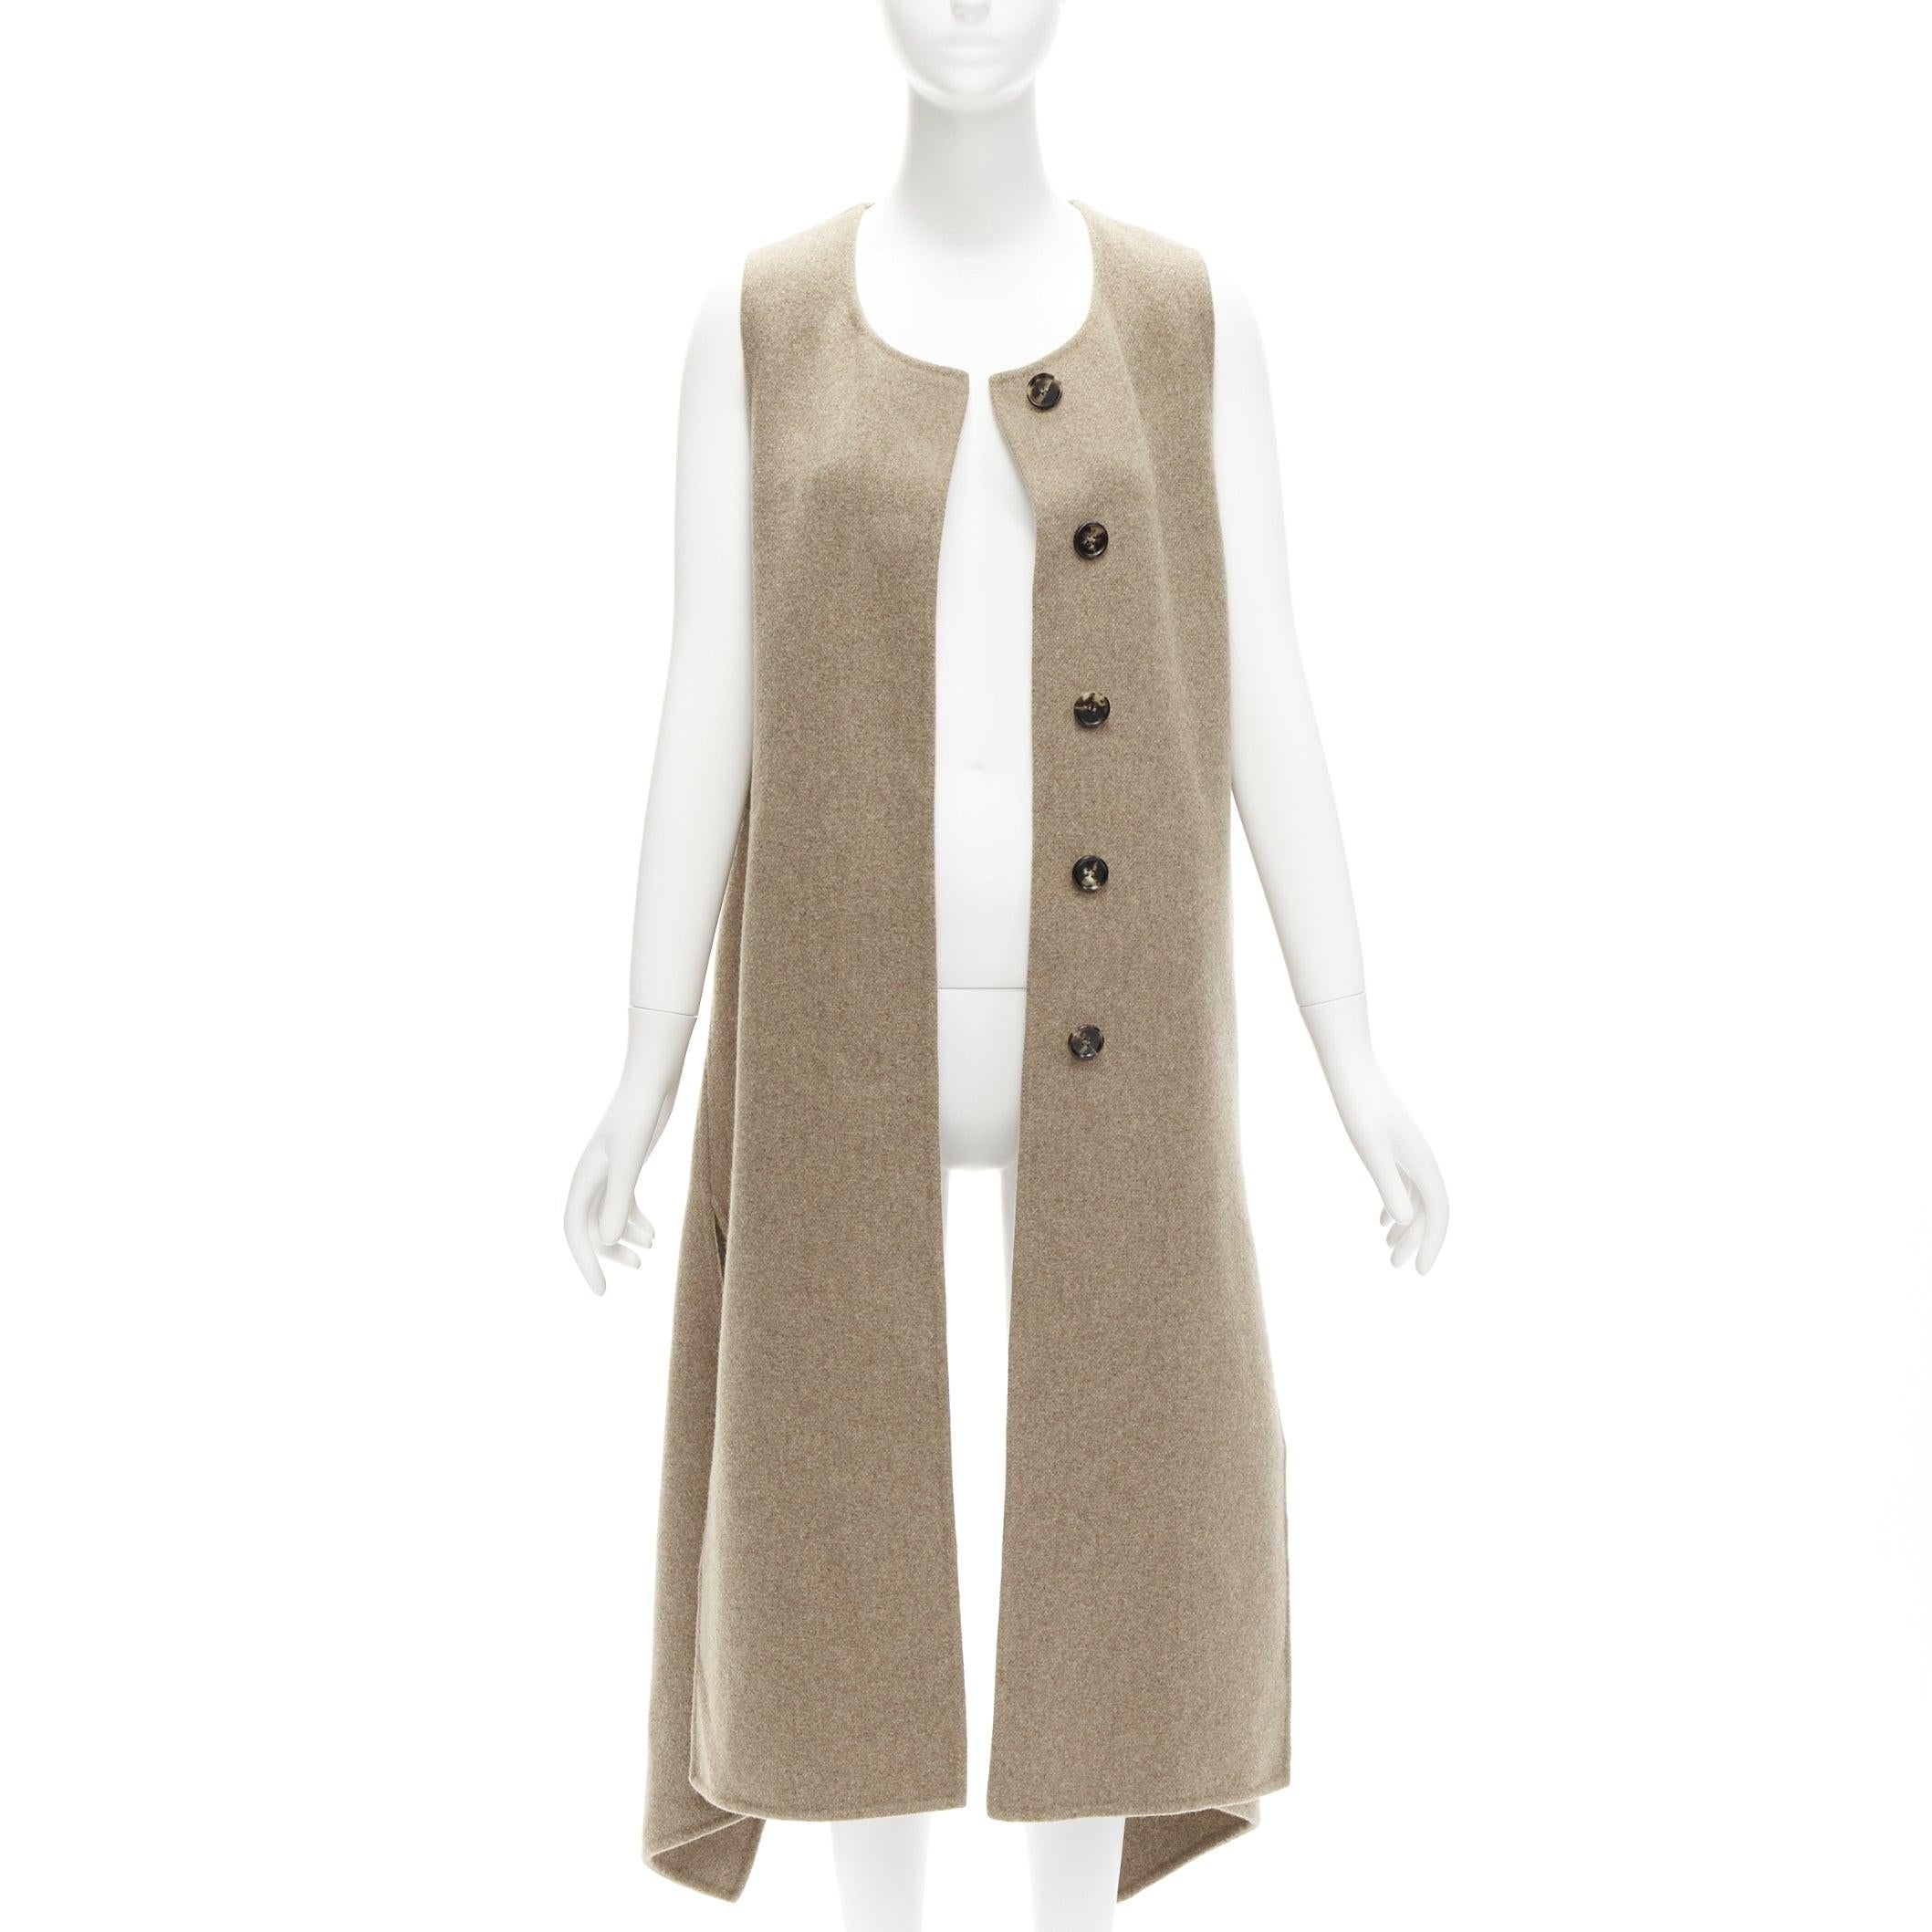 MARNI taupe brown virgin wool blend high low hem vest coat IT36 XS
Reference: CELG/A00248
Brand: Marni
Material: Virgin Wool, Blend
Color: Brown
Pattern: Solid
Closure: Button
Extra Details: Hidden buttons. Reverse high low hem.
Made in: